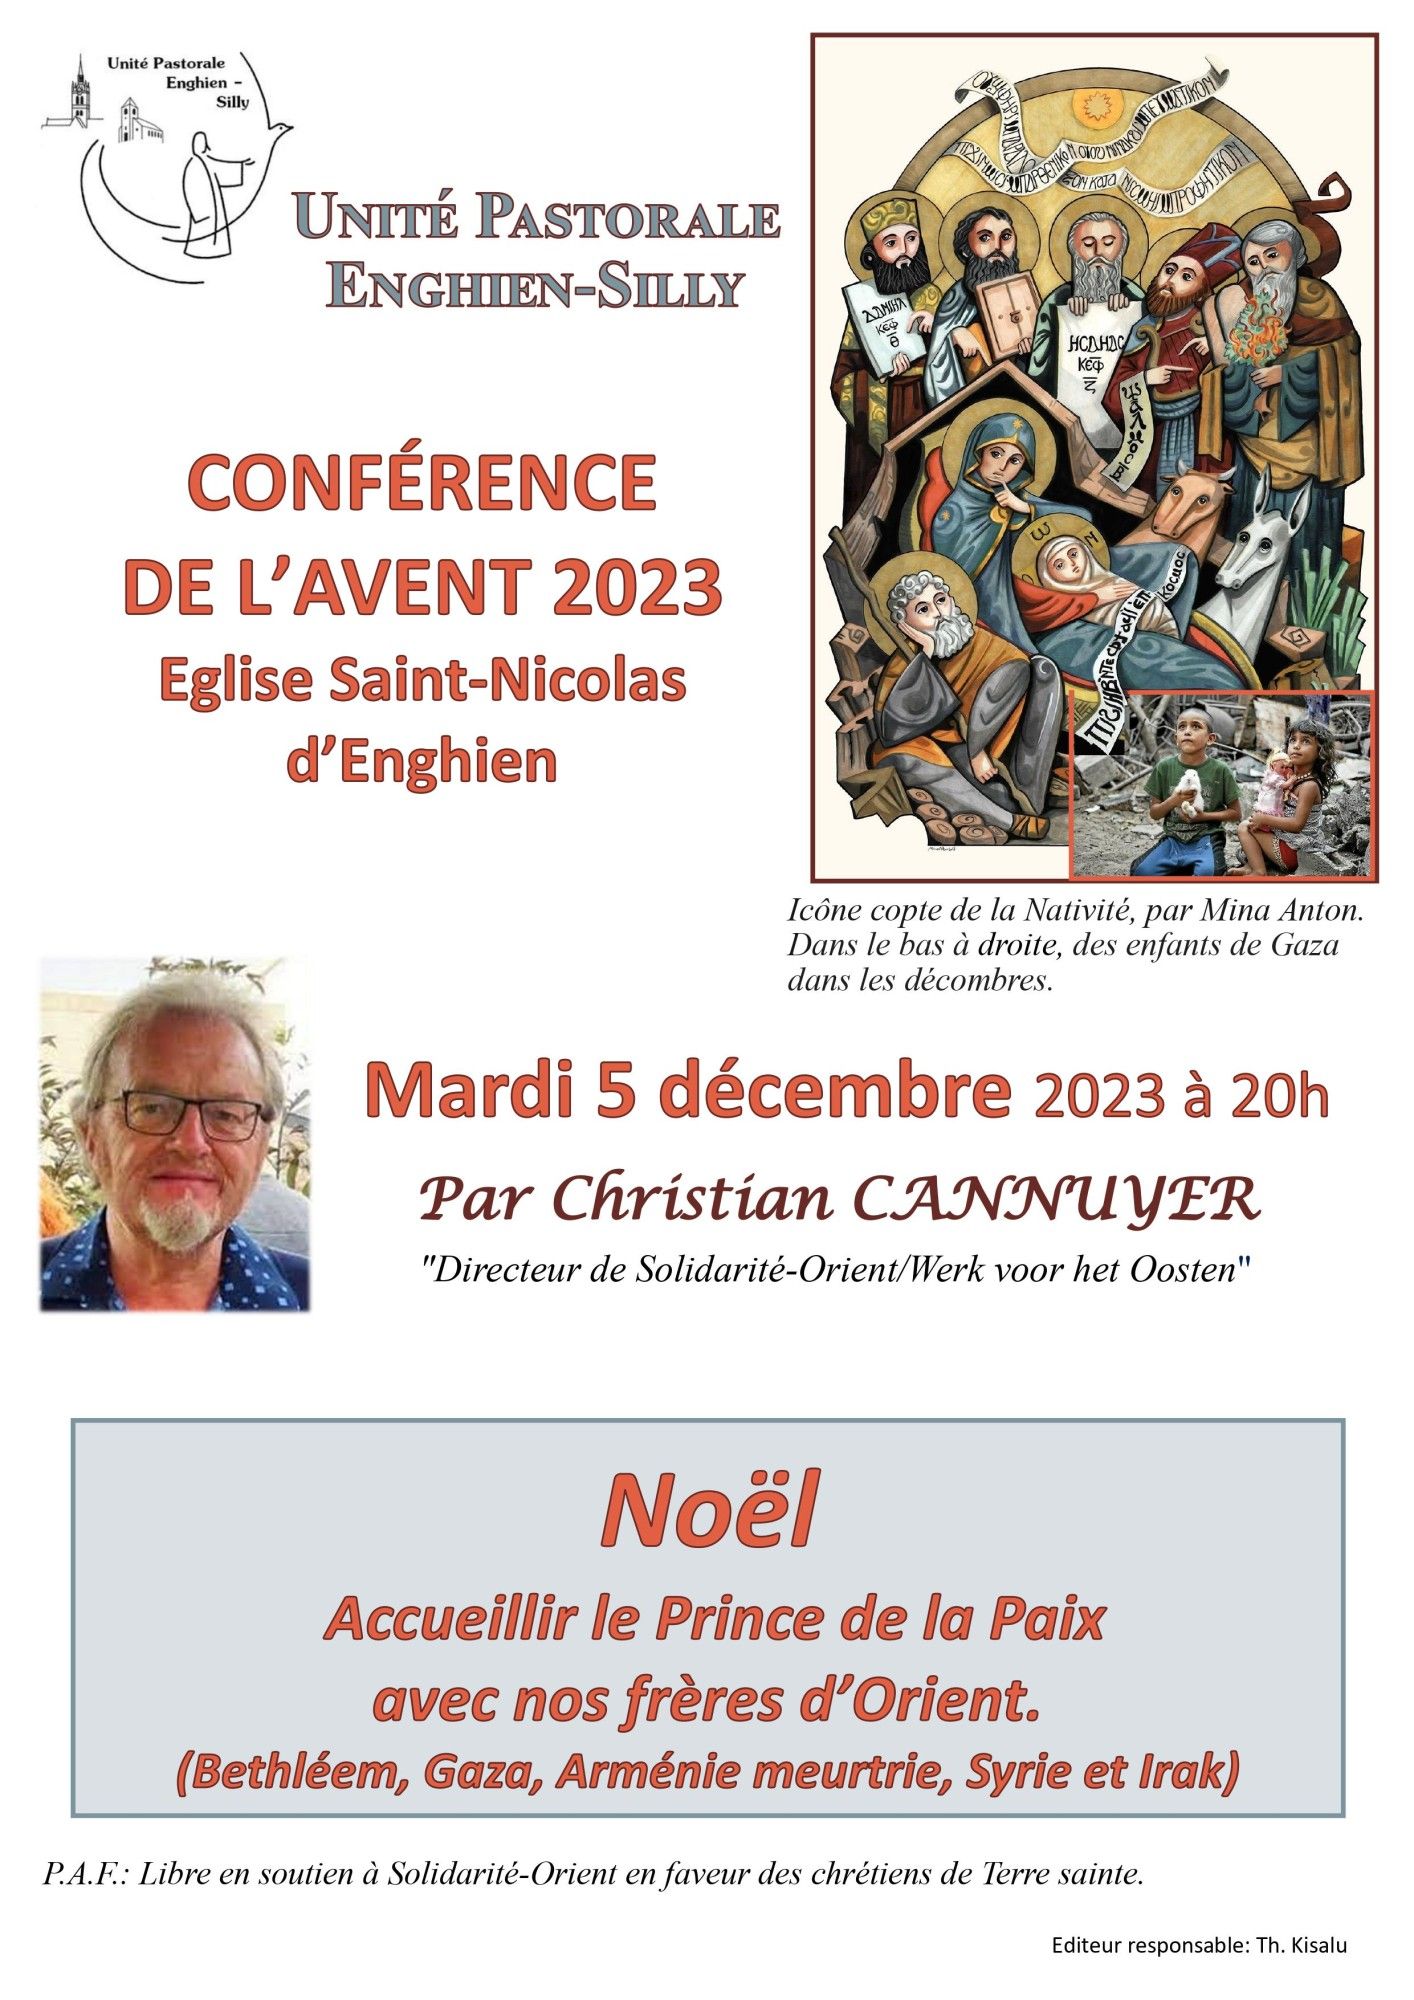 Advent Conference